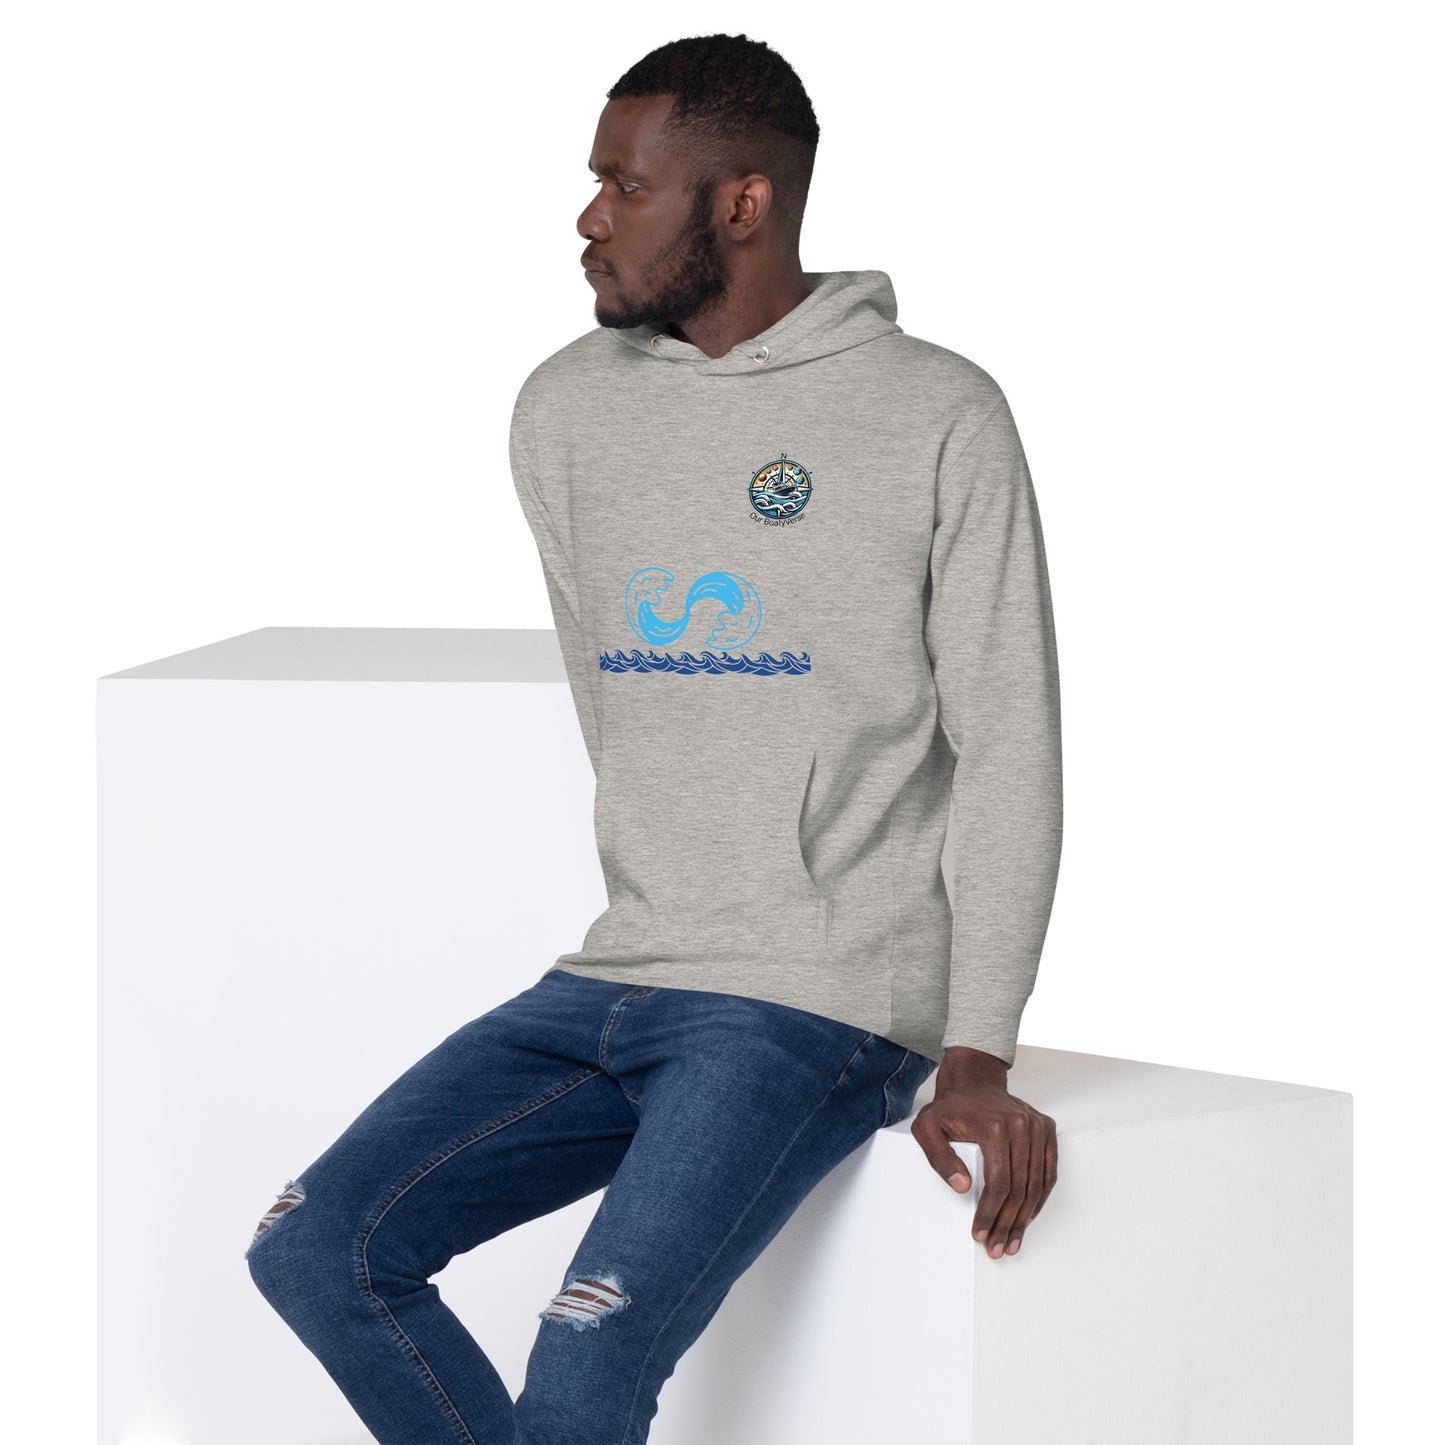 Mens Waves and Sunburst Hoodie by Our BoatyVerse